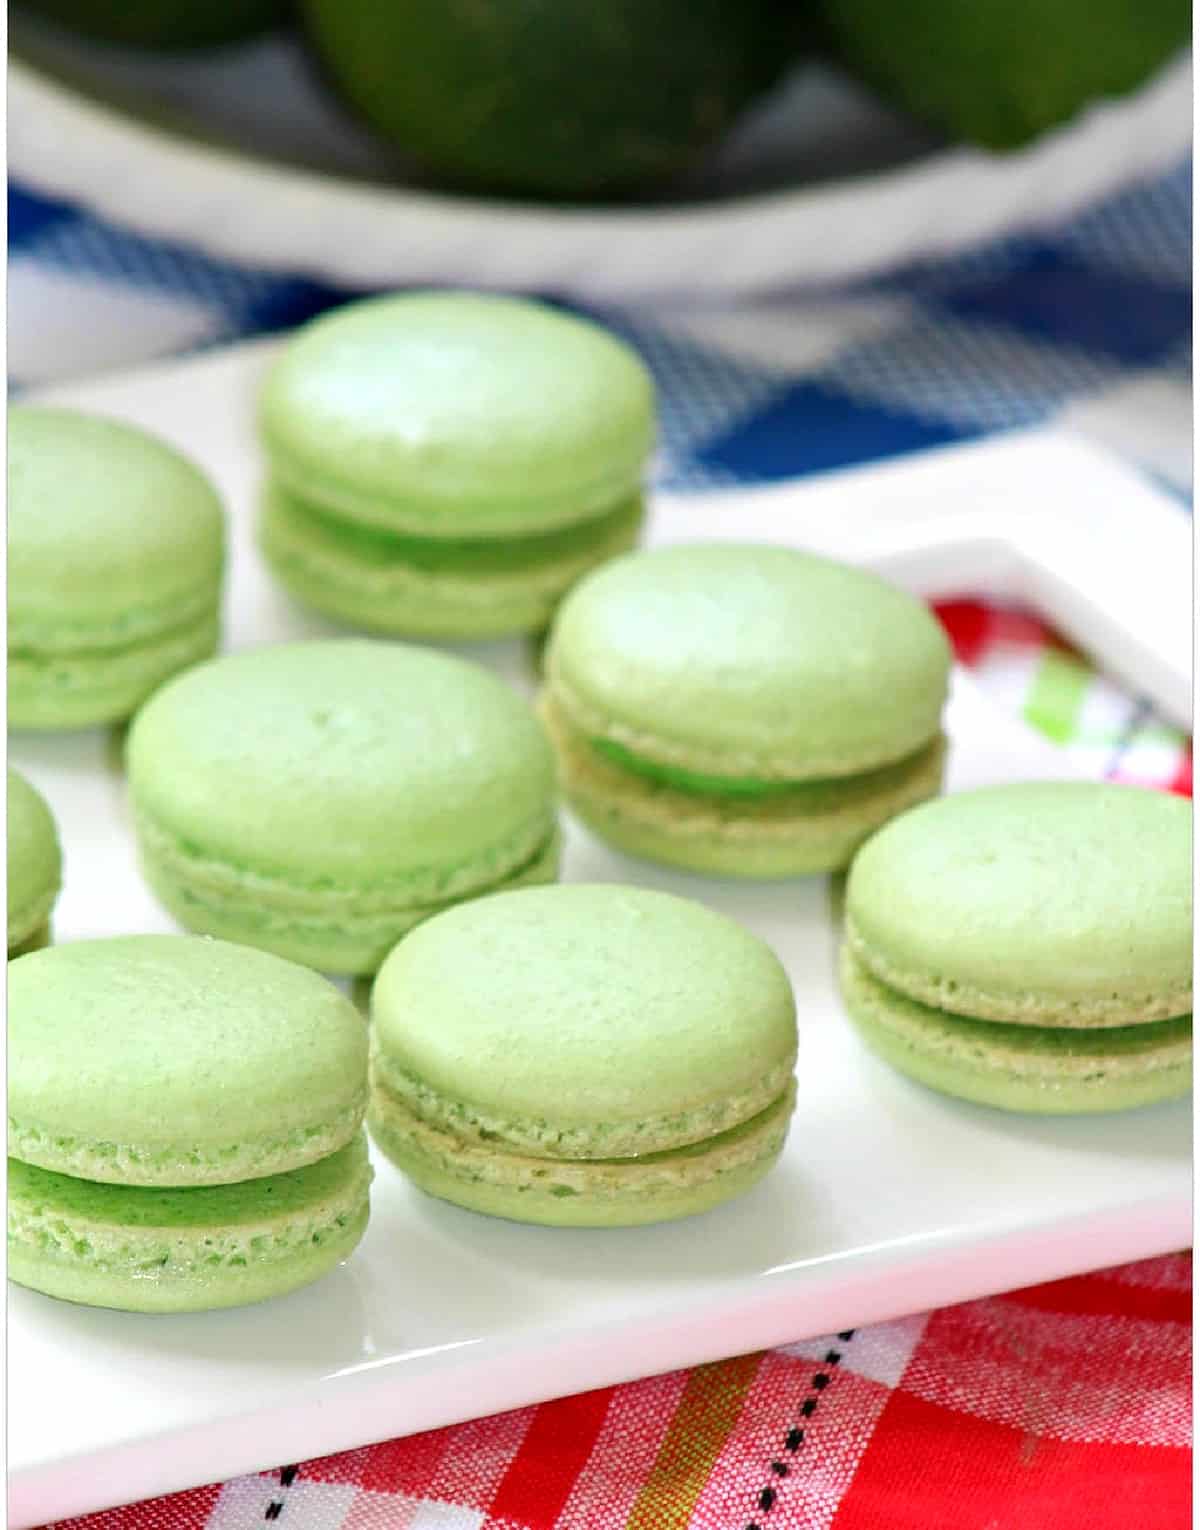 Green macaron cookies on a white plate on a red plaid tabelcloth.